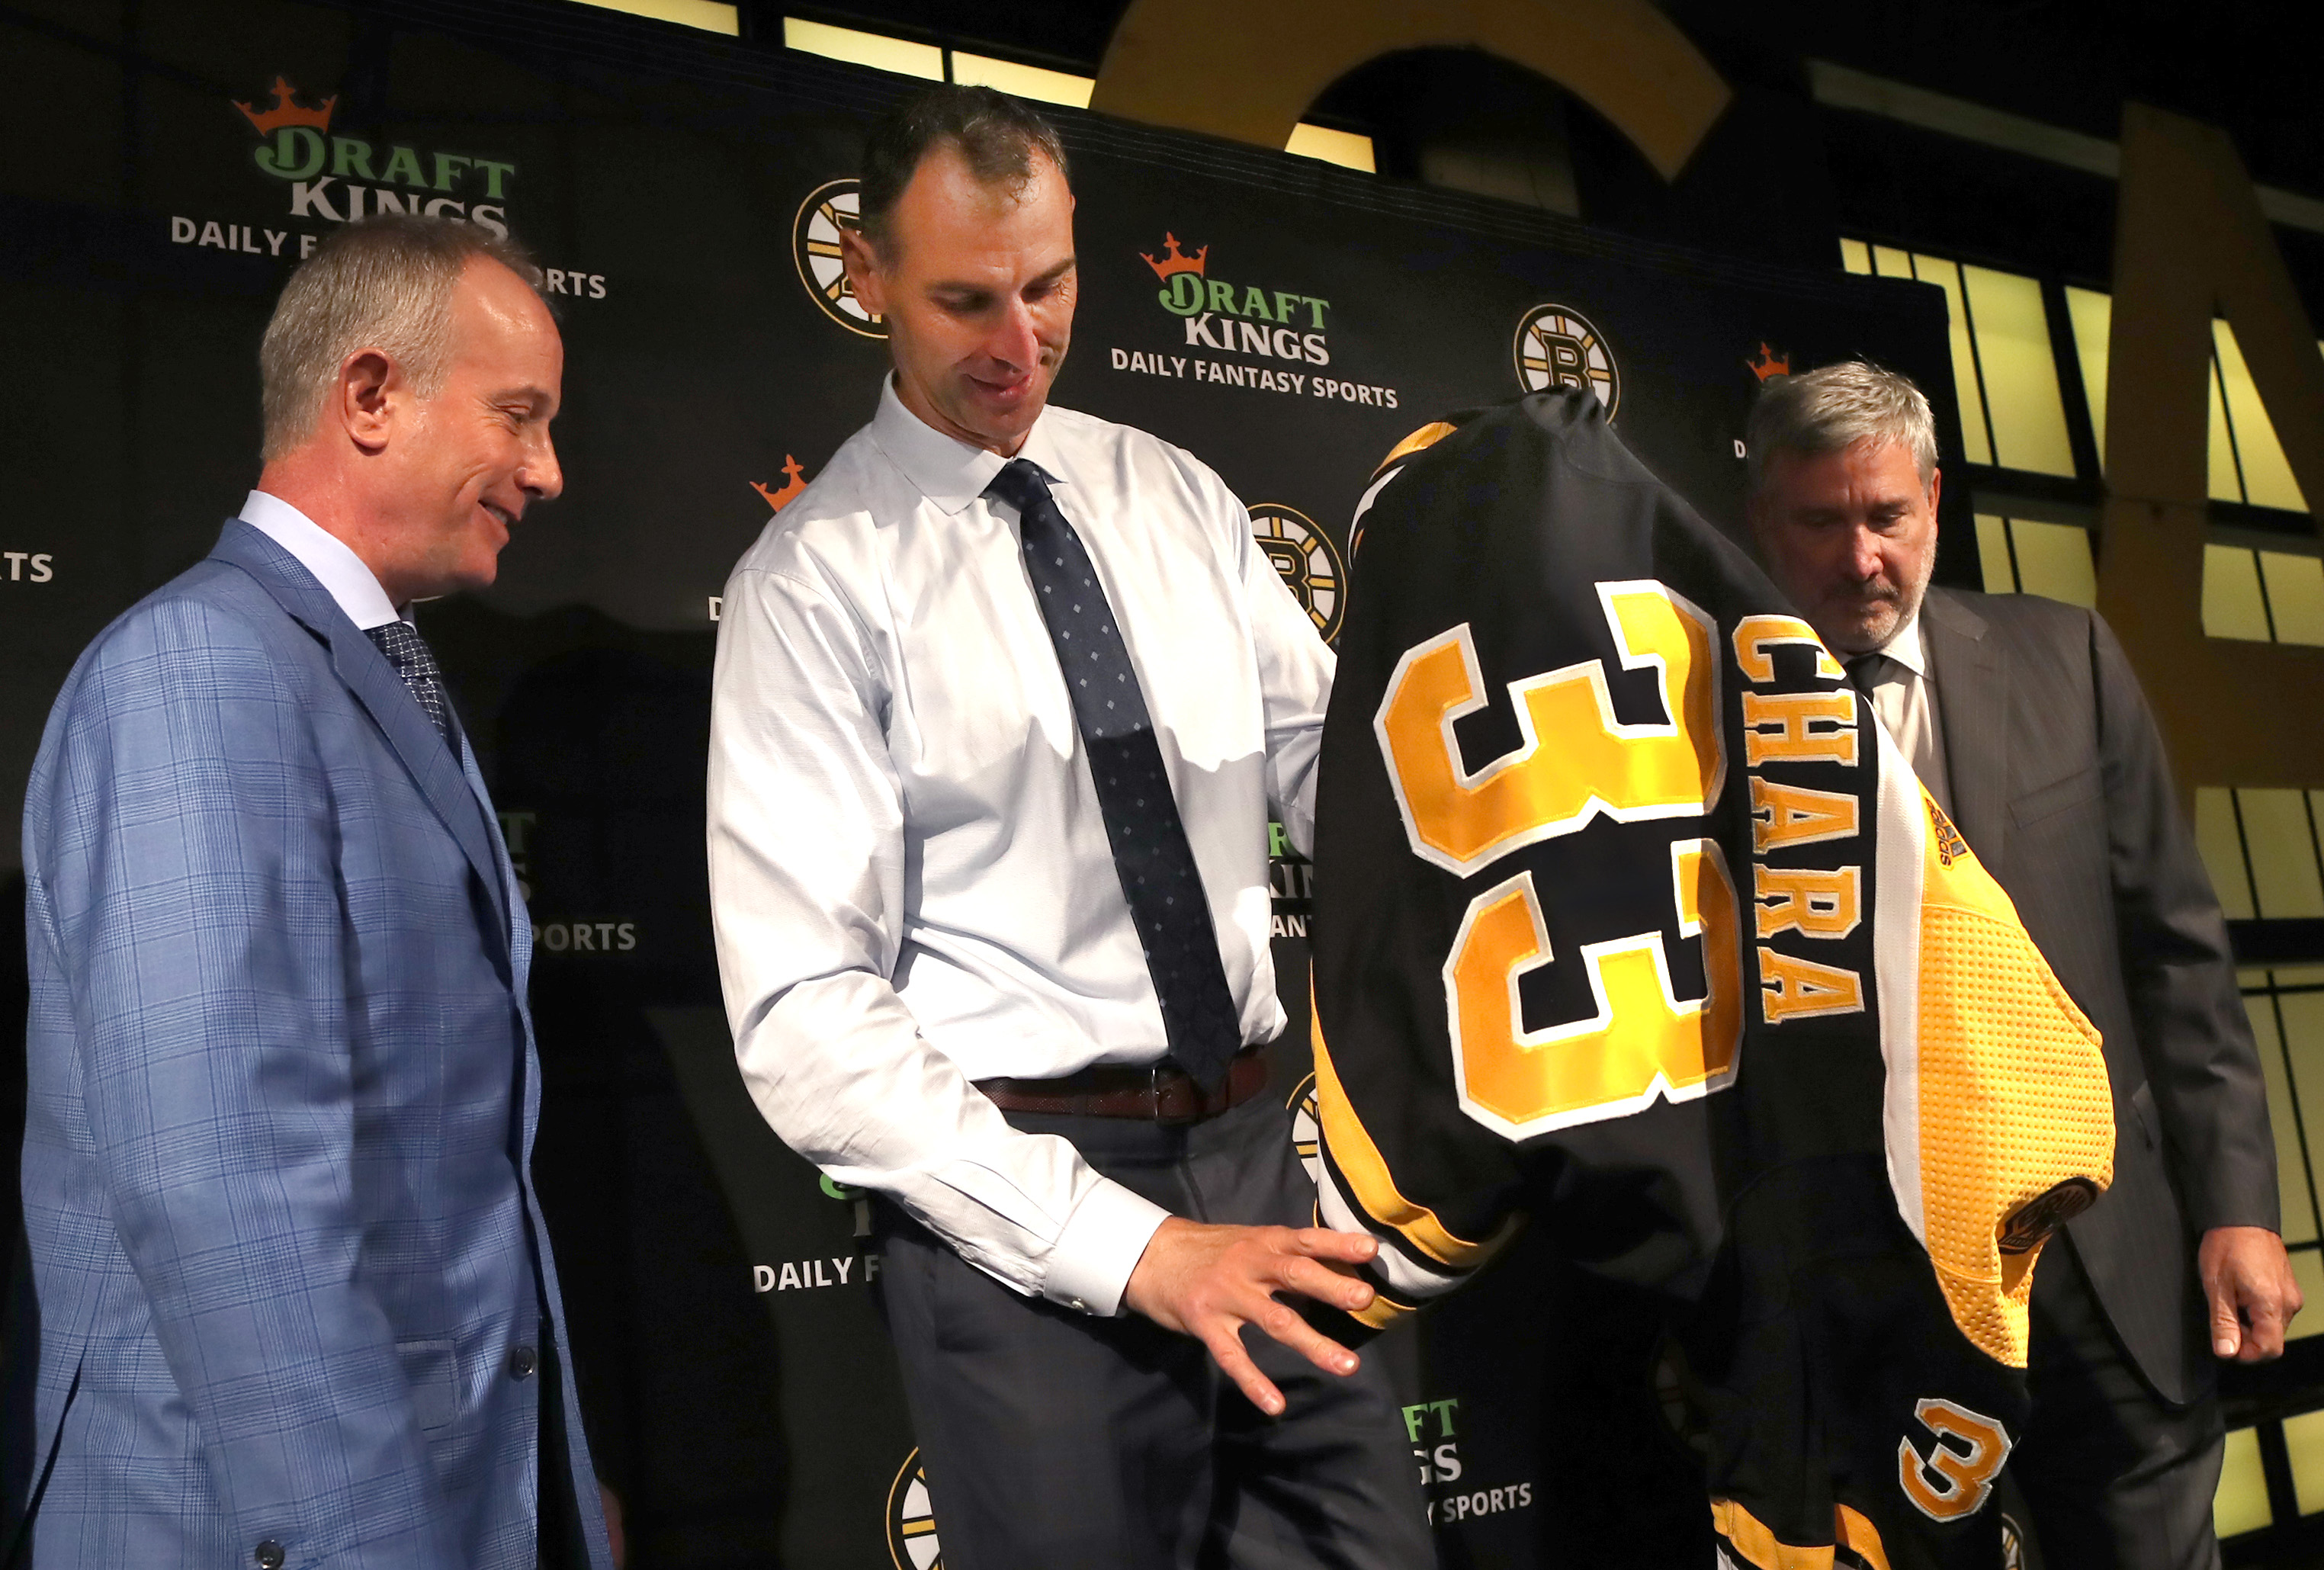 Ageless Zdeno Chara is honored before Bruins' victory - The Boston